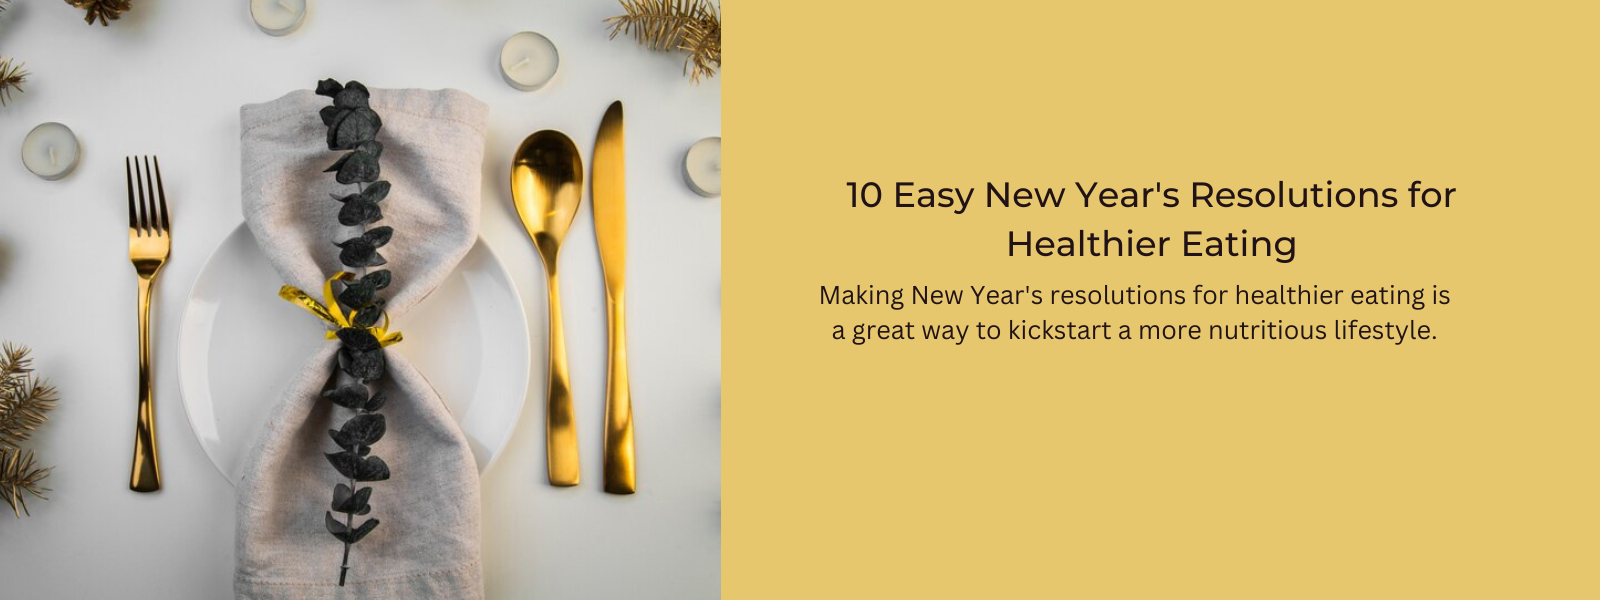 10 Easy New Year's Resolutions for Healthier Eating